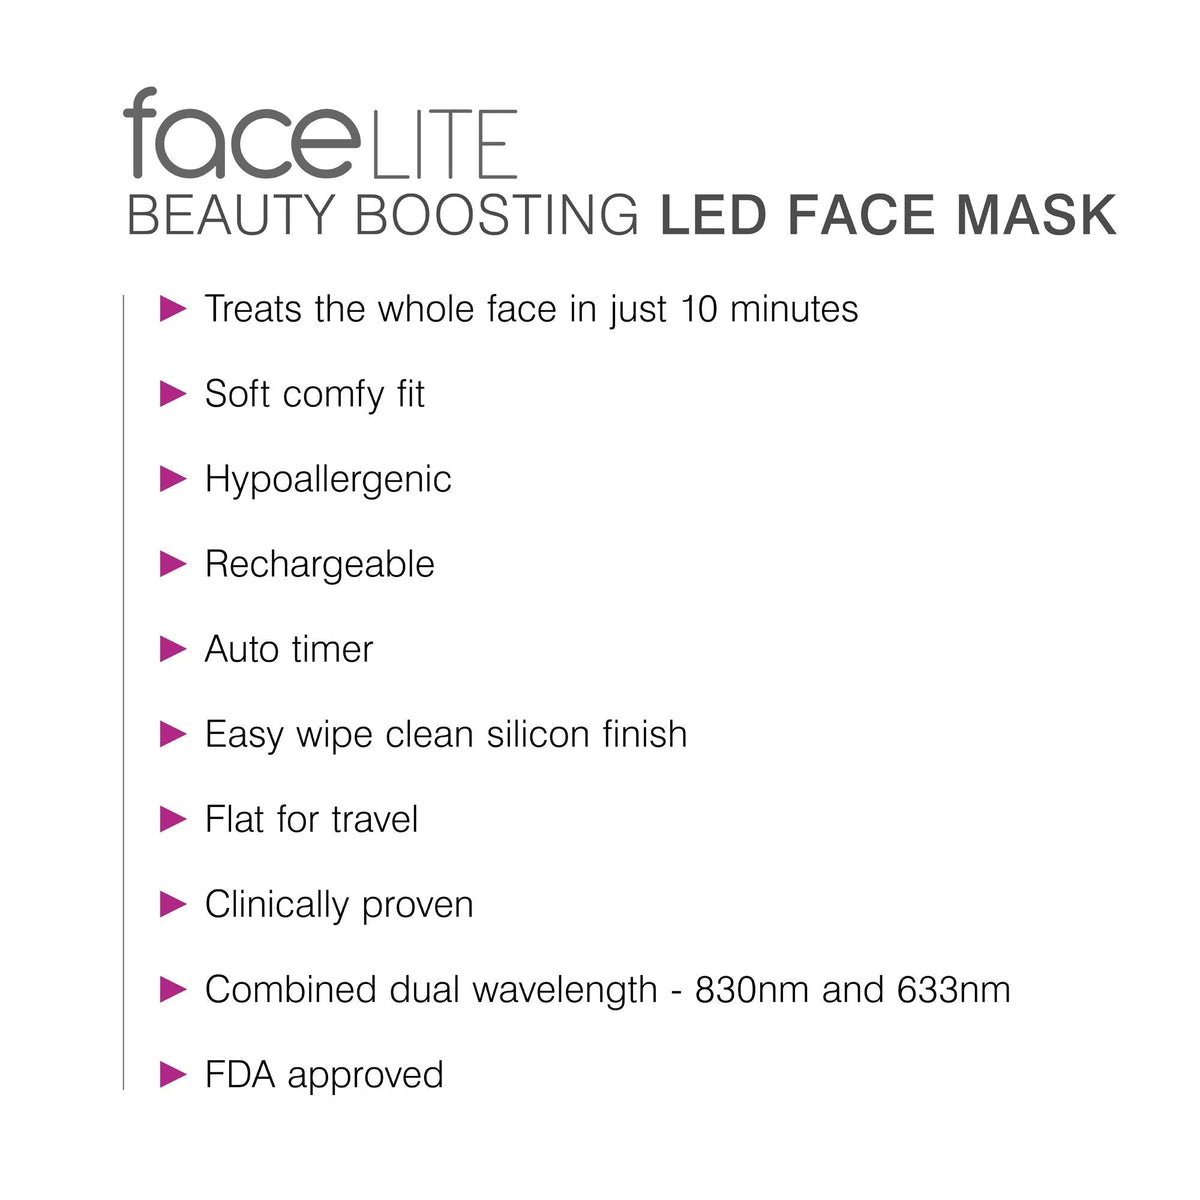 faceLITE beauty boosting LED face mask SV Rio the Beauty Specialists